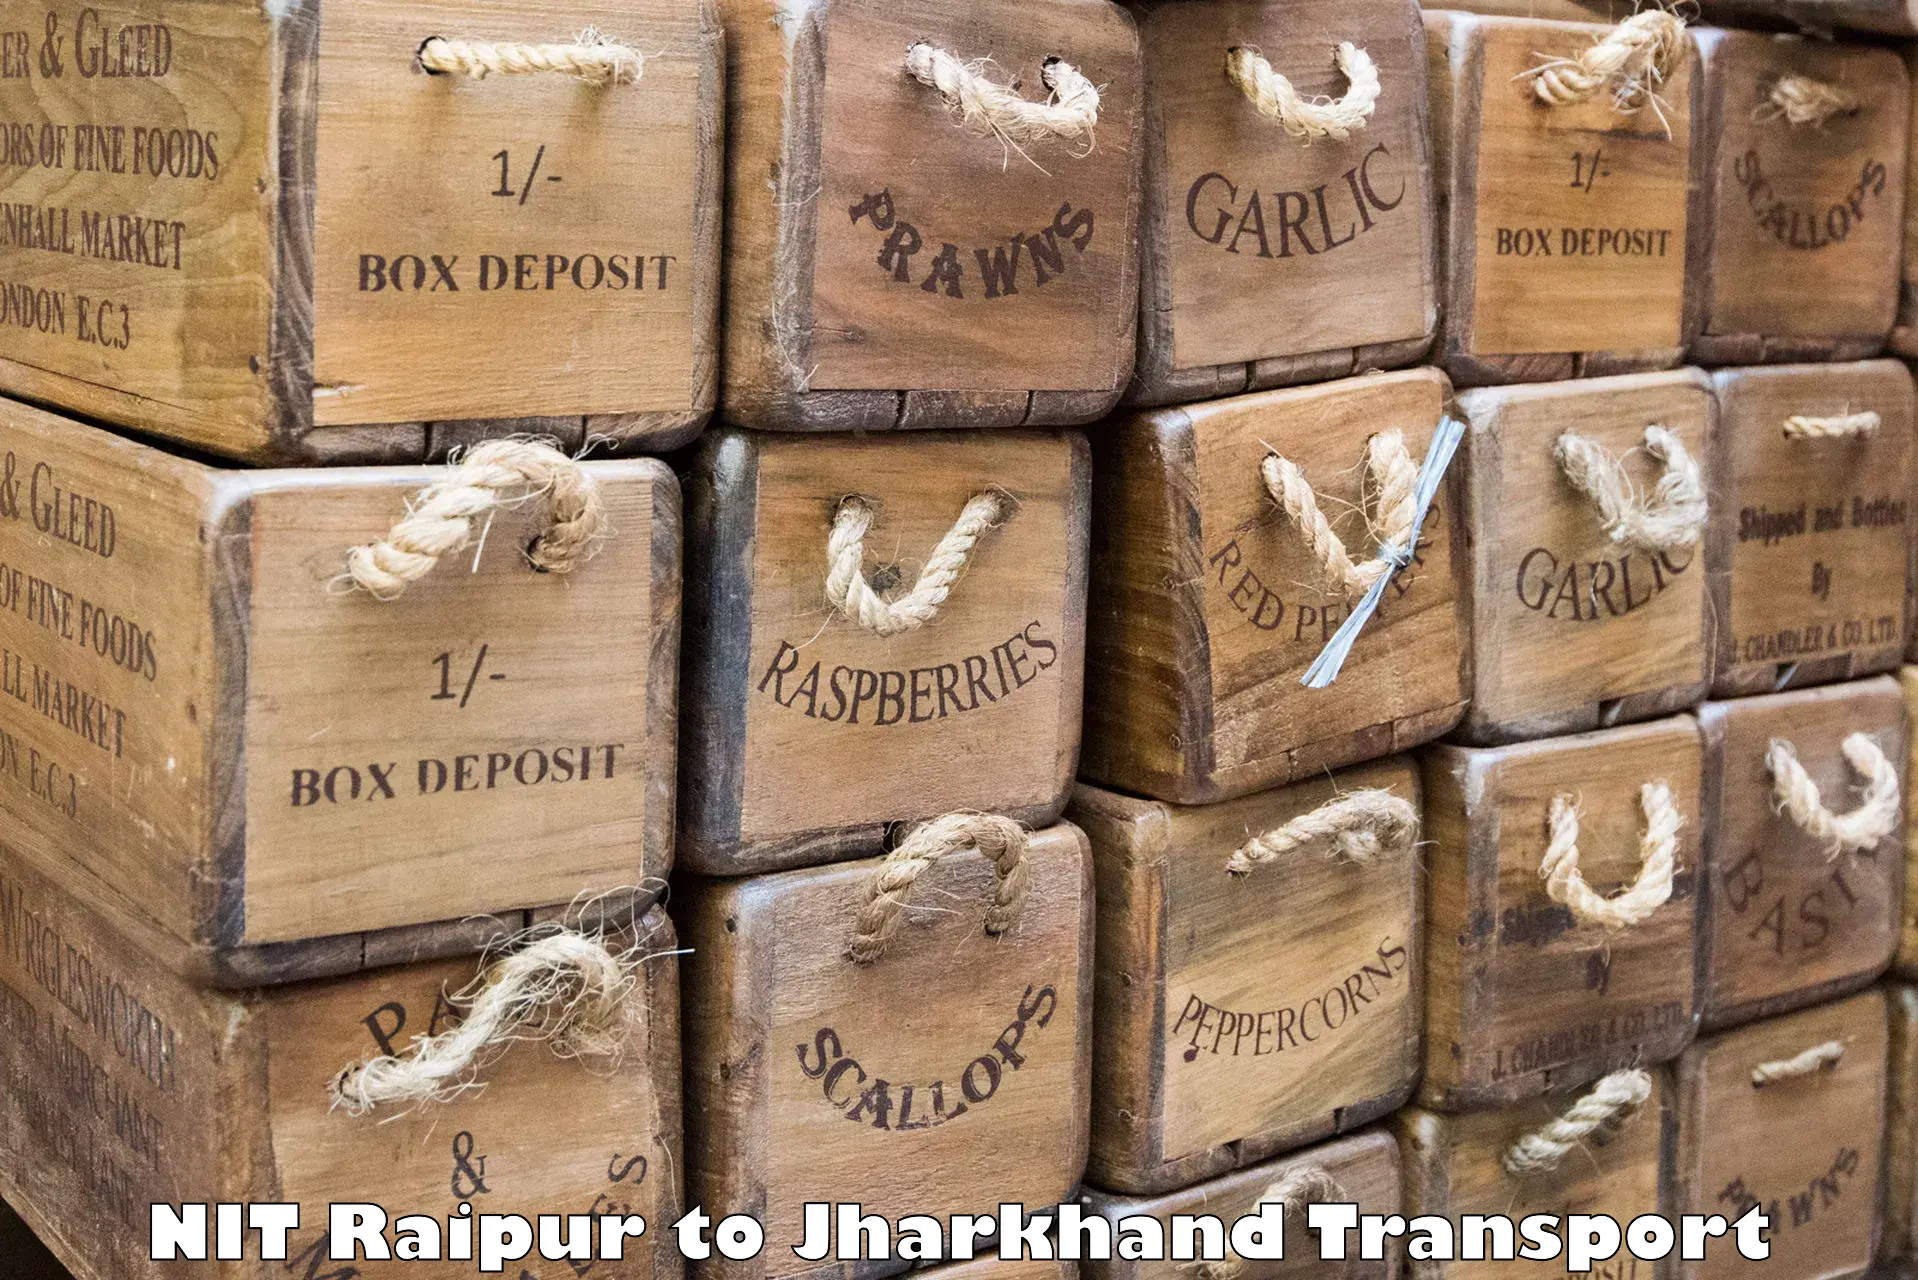 Air freight transport services in NIT Raipur to Dhanbad